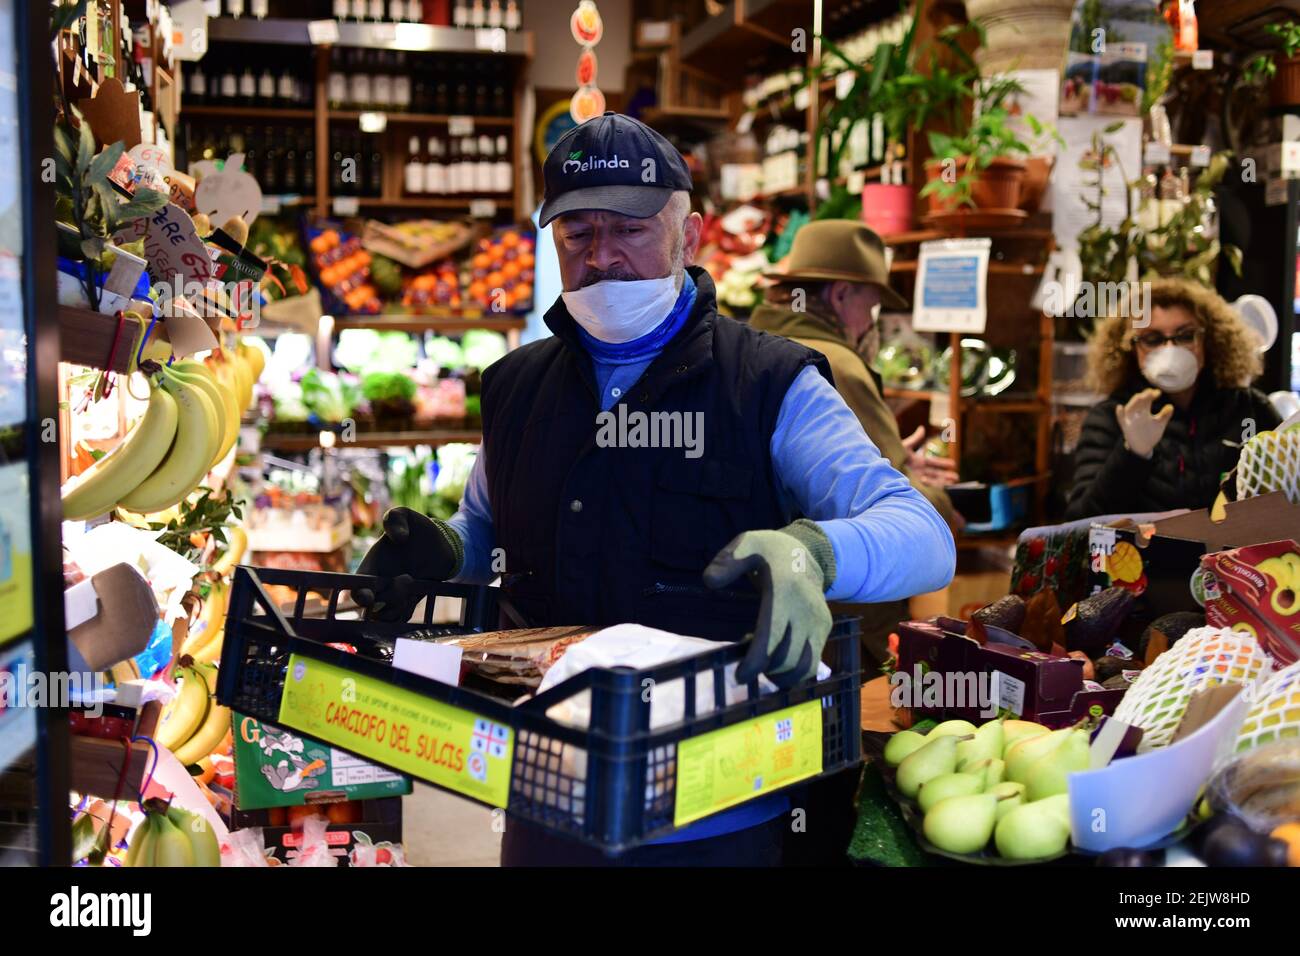 Milan, Italy - 13 March 2020: Roberto , the owner of the greengrocer shop  Frutteto Ciovasso in the Brera district, wears a face mask and works as  restrictive measures are taken to